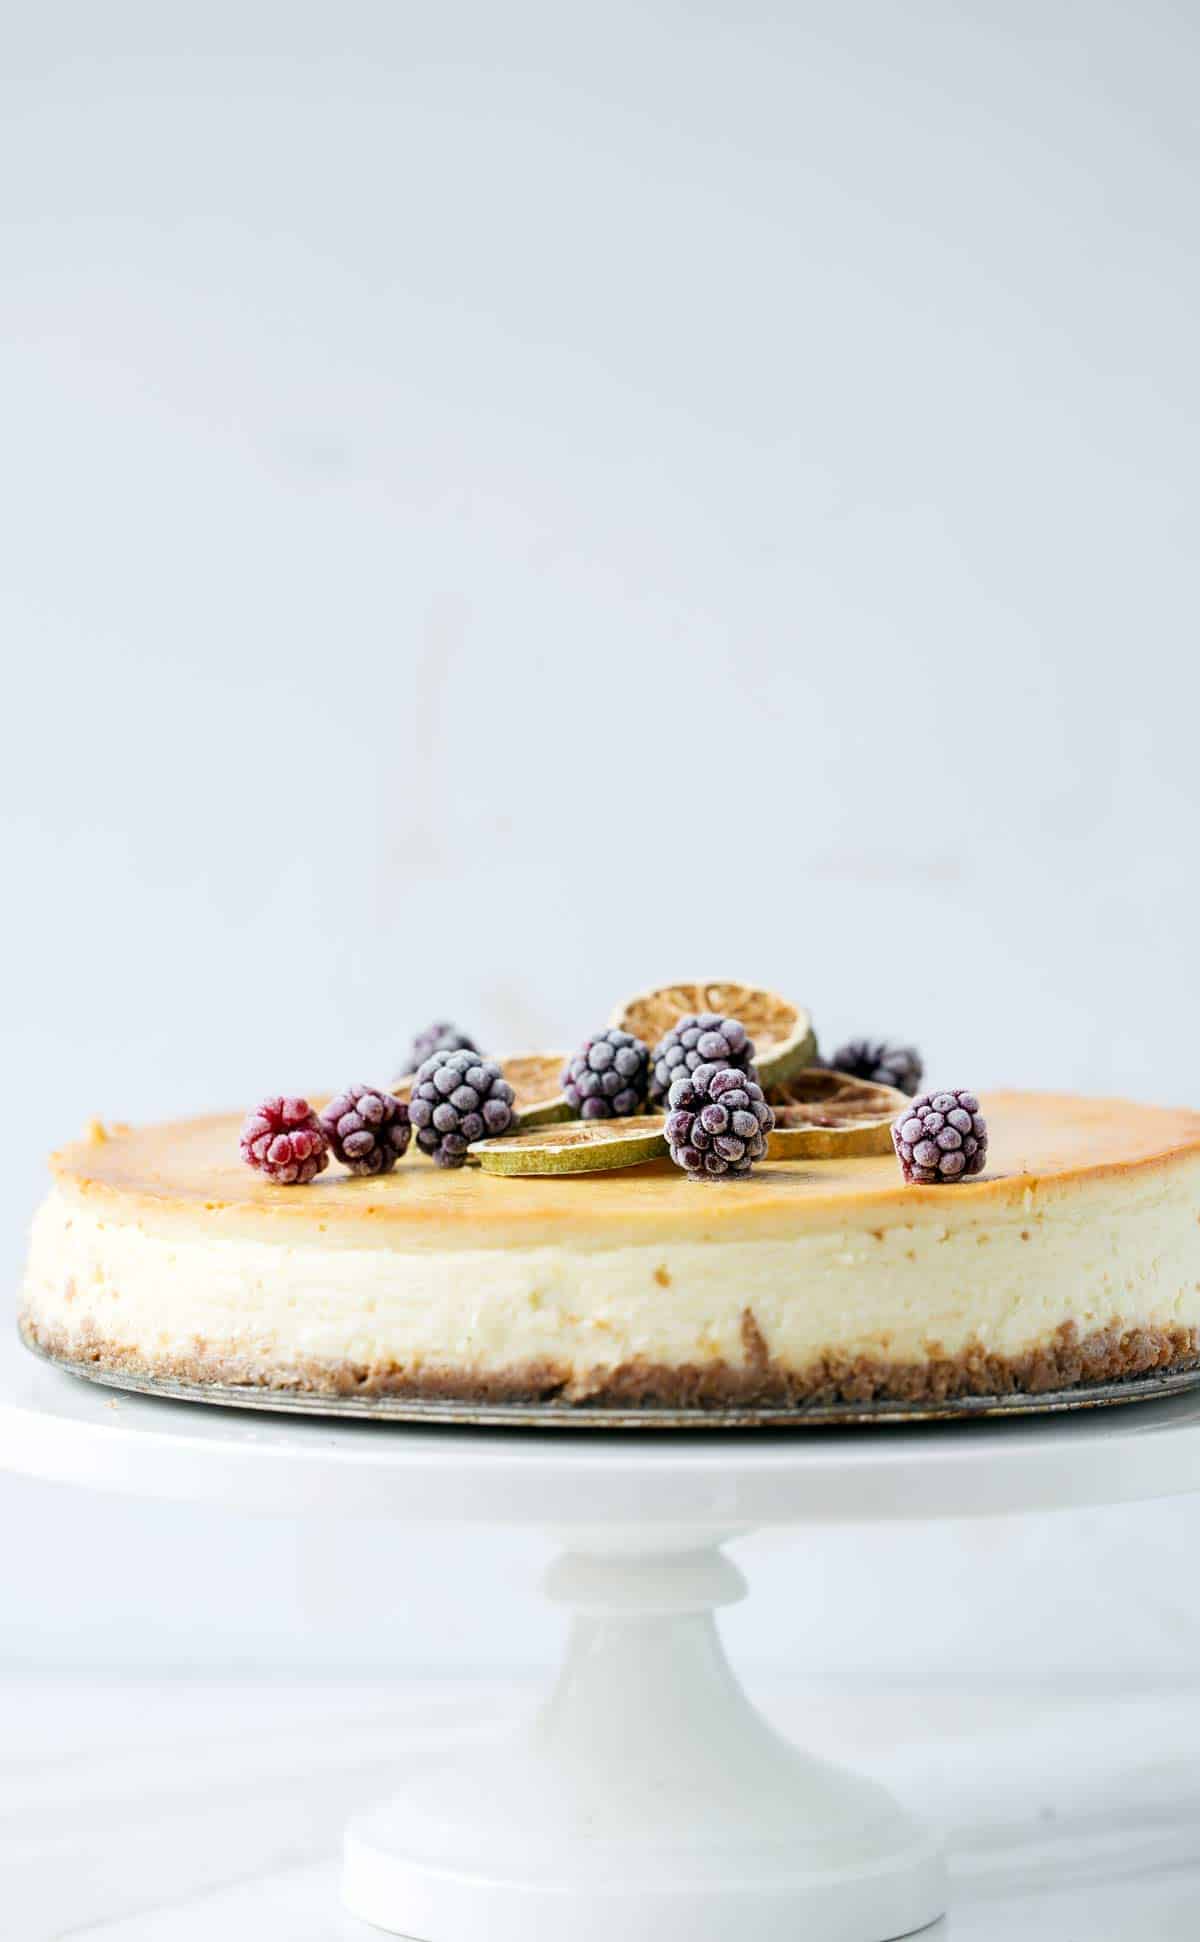 Churro Cheesecake with Cinnamon Toast Crunch crust and creamy lemon lime cheesecake filling is delicious with blackberry sauce topping. churro cheesecake | churro cheesecake recipe | cinnamon toast crunch recipes | cinnamon cheesecake | lemon lime cheesecake